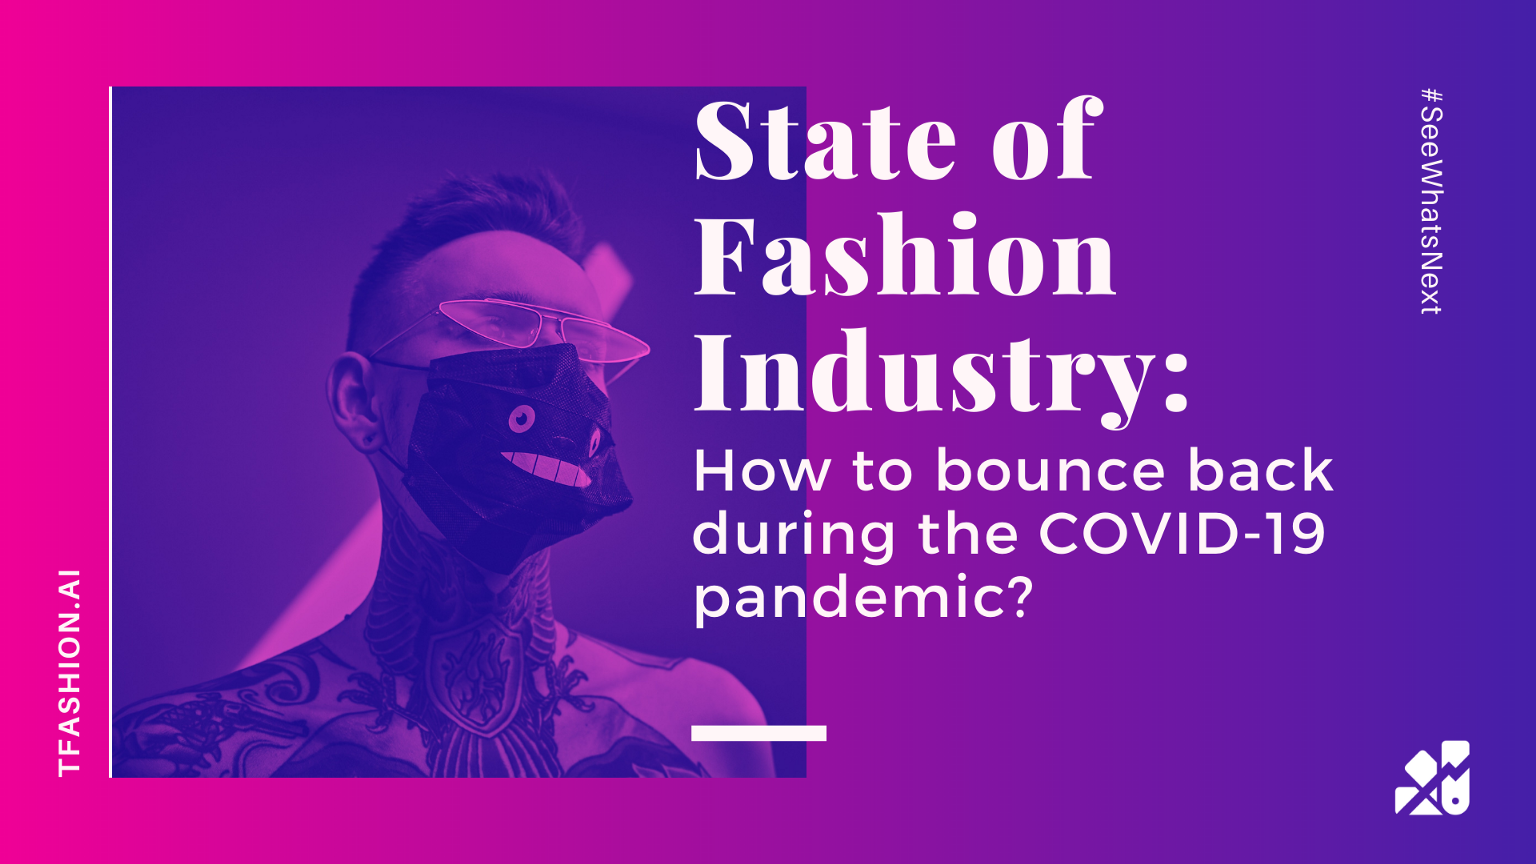 State of Fashion Industry: How to bounce back during the COVID-19 pandemic?